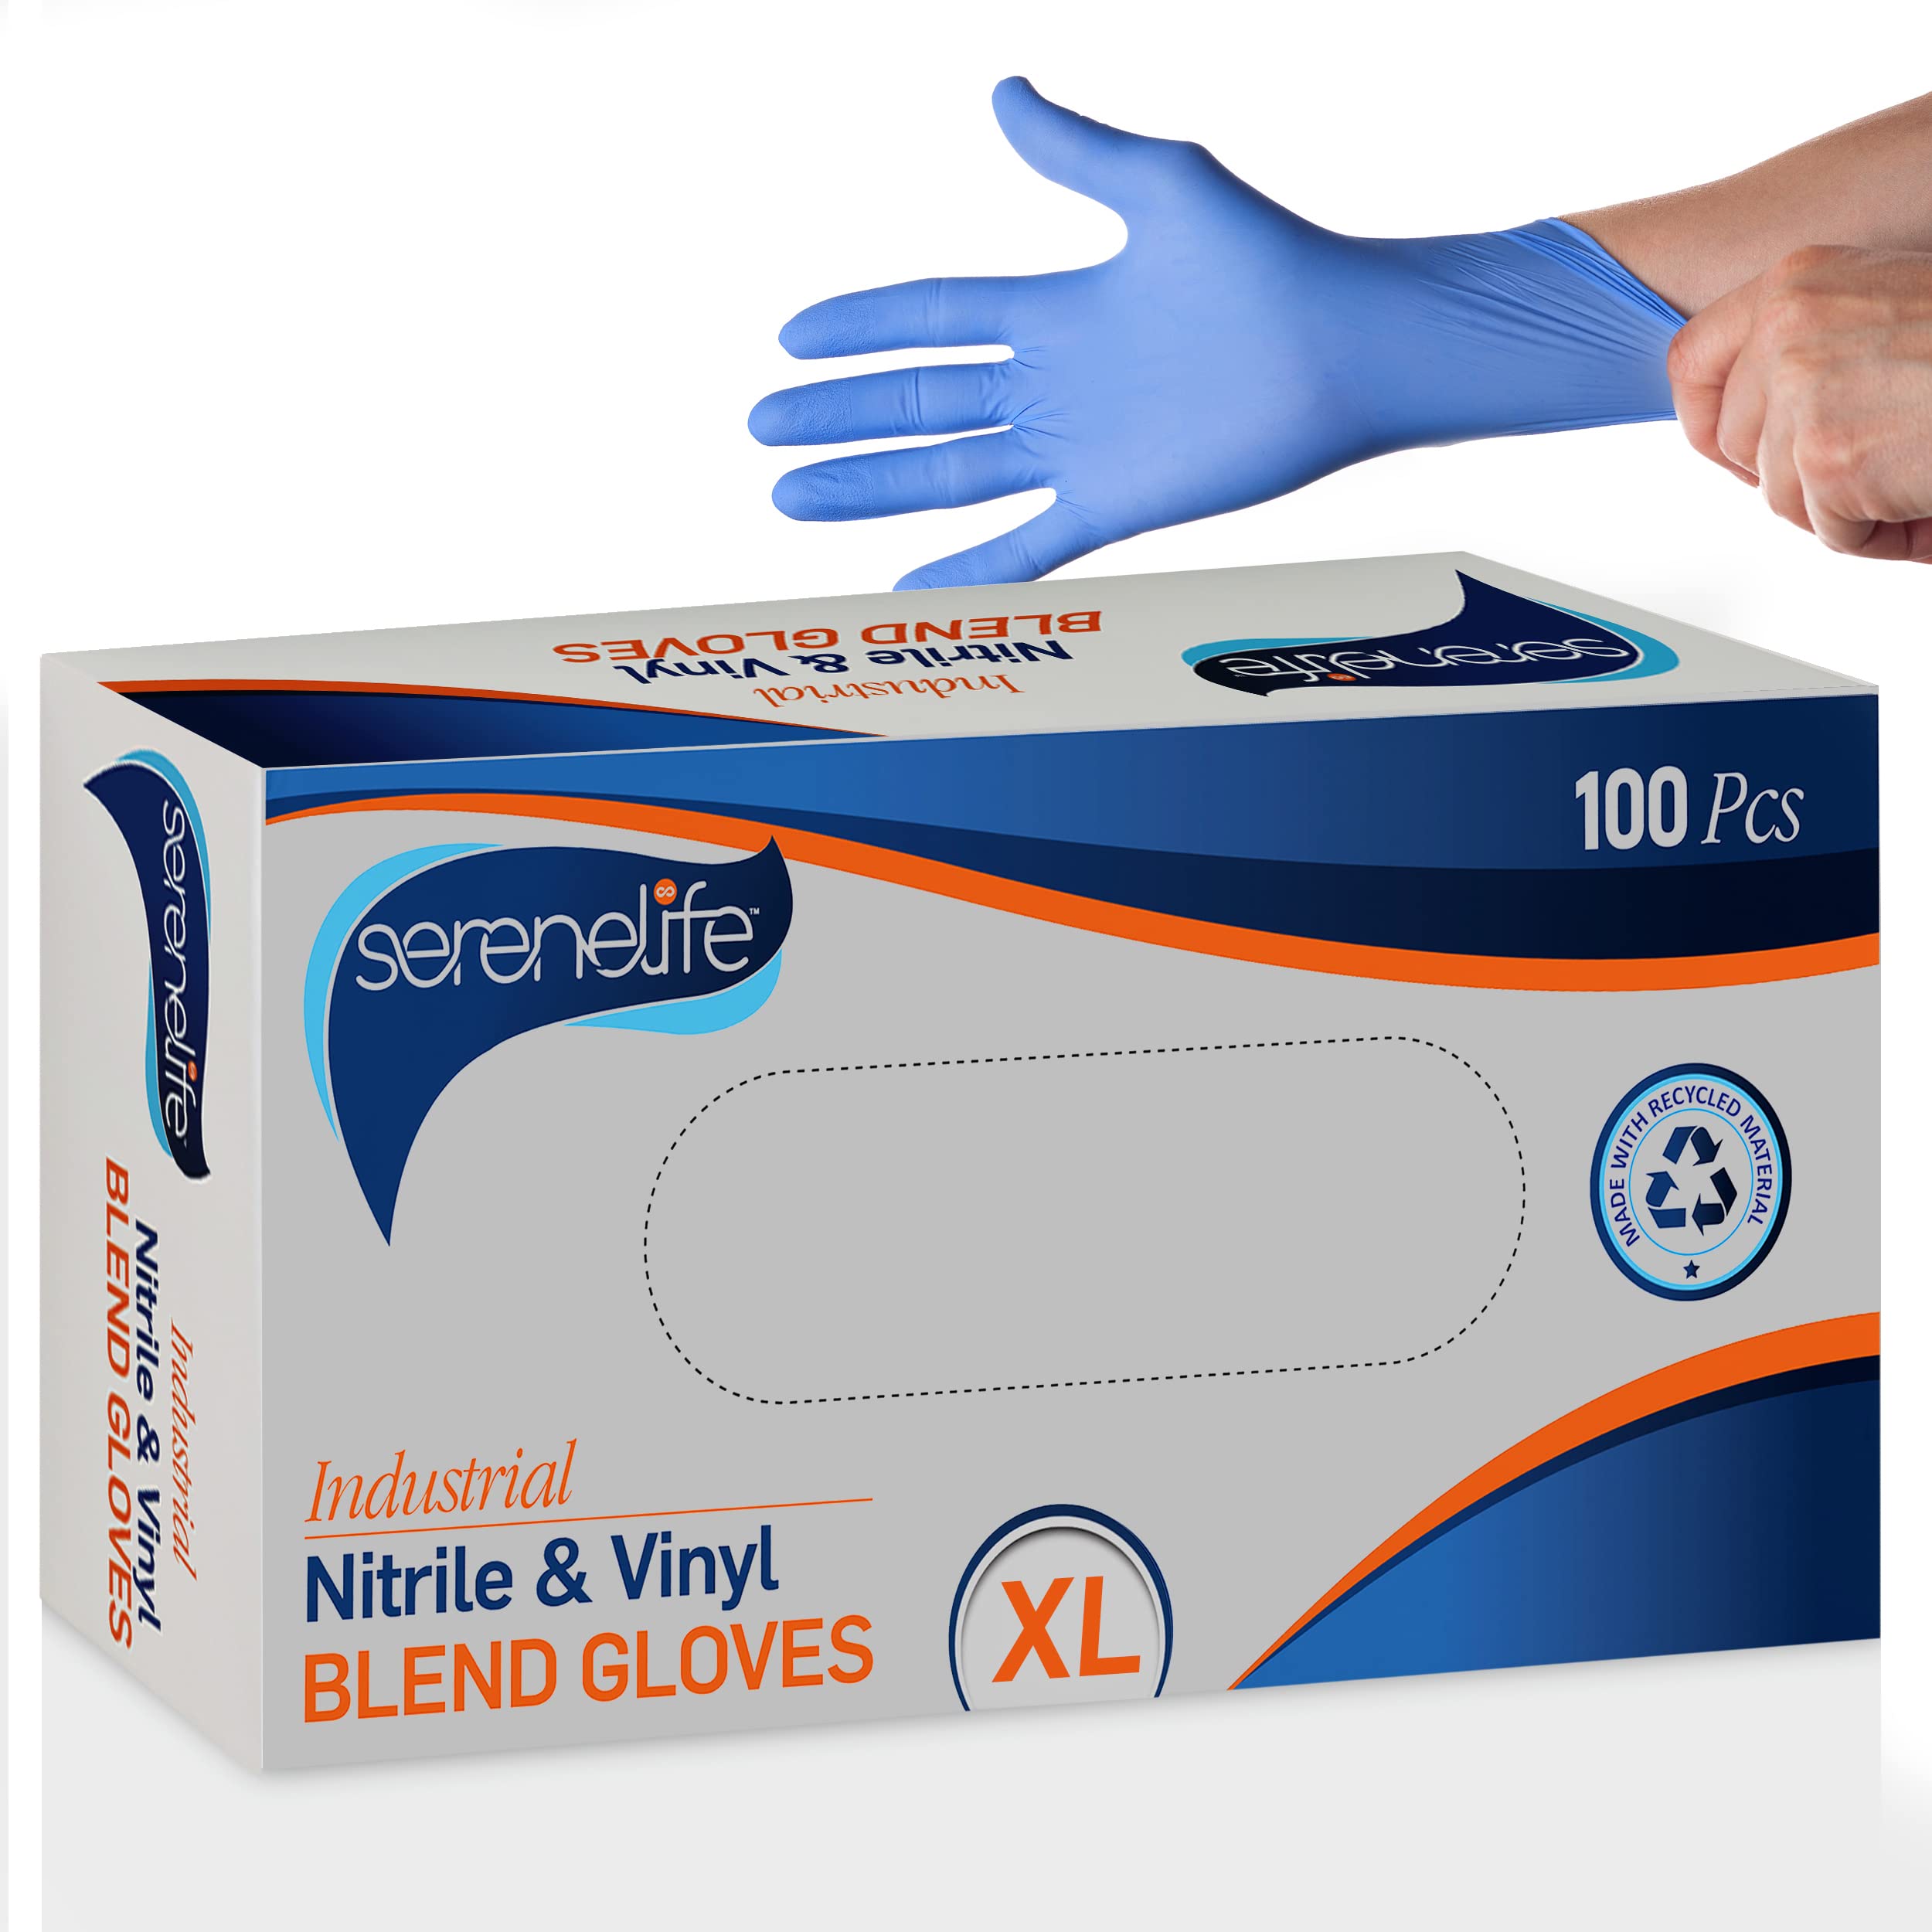 100 Pcs Nitrile Disposable Gloves - Soft Industrial Gloves, Vinyl Gloves Powder-Free, Latex-Free Protective Gloves, Soft and Comfortable, Size Large, 100 Count